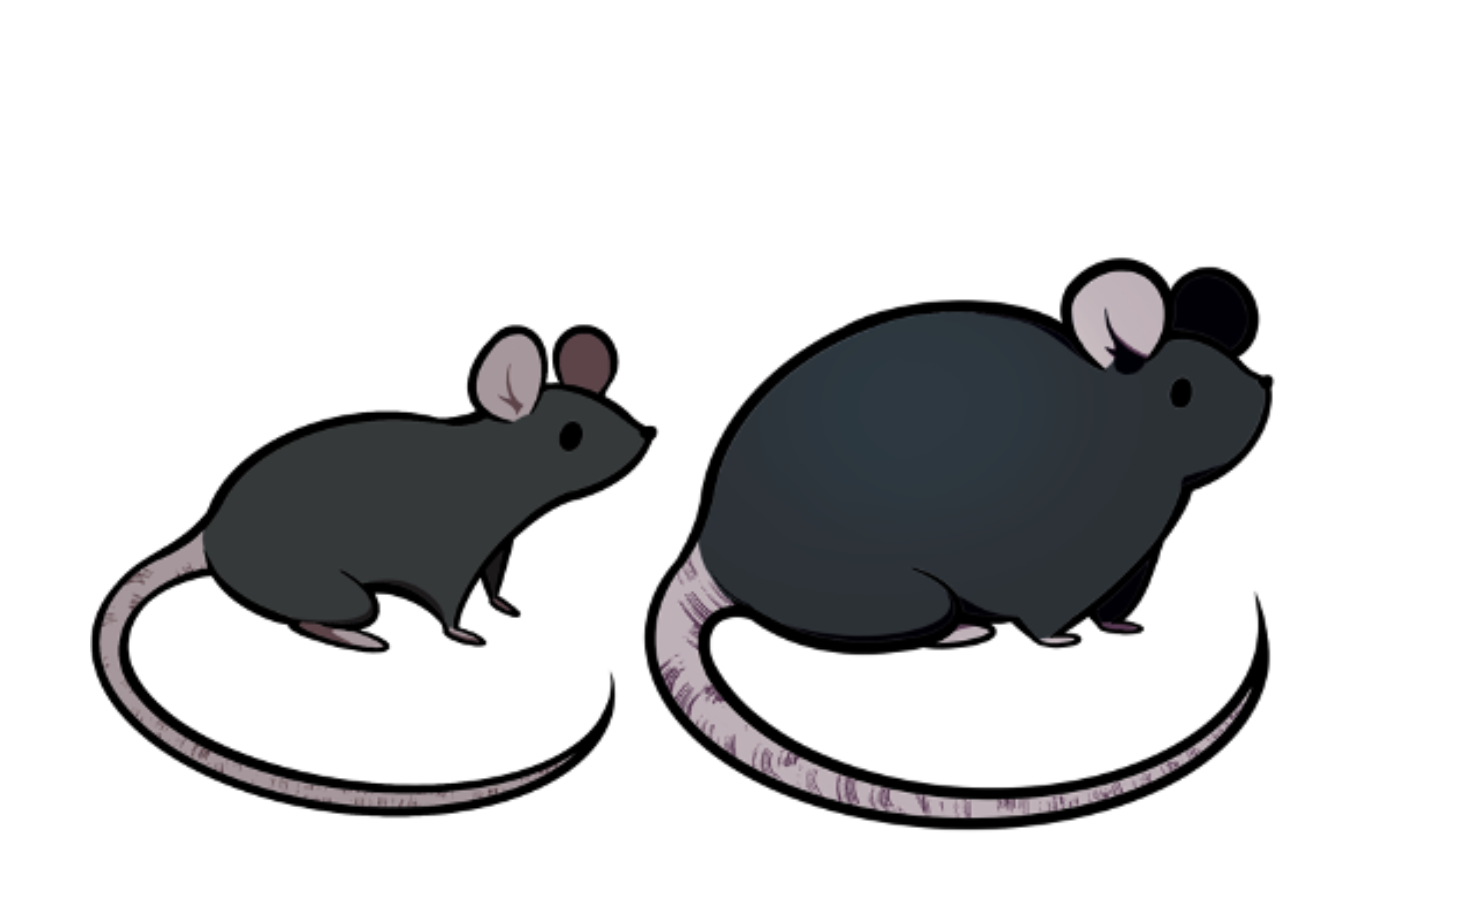 Illustration of two mice, representing a typical and ob/ob mouse.